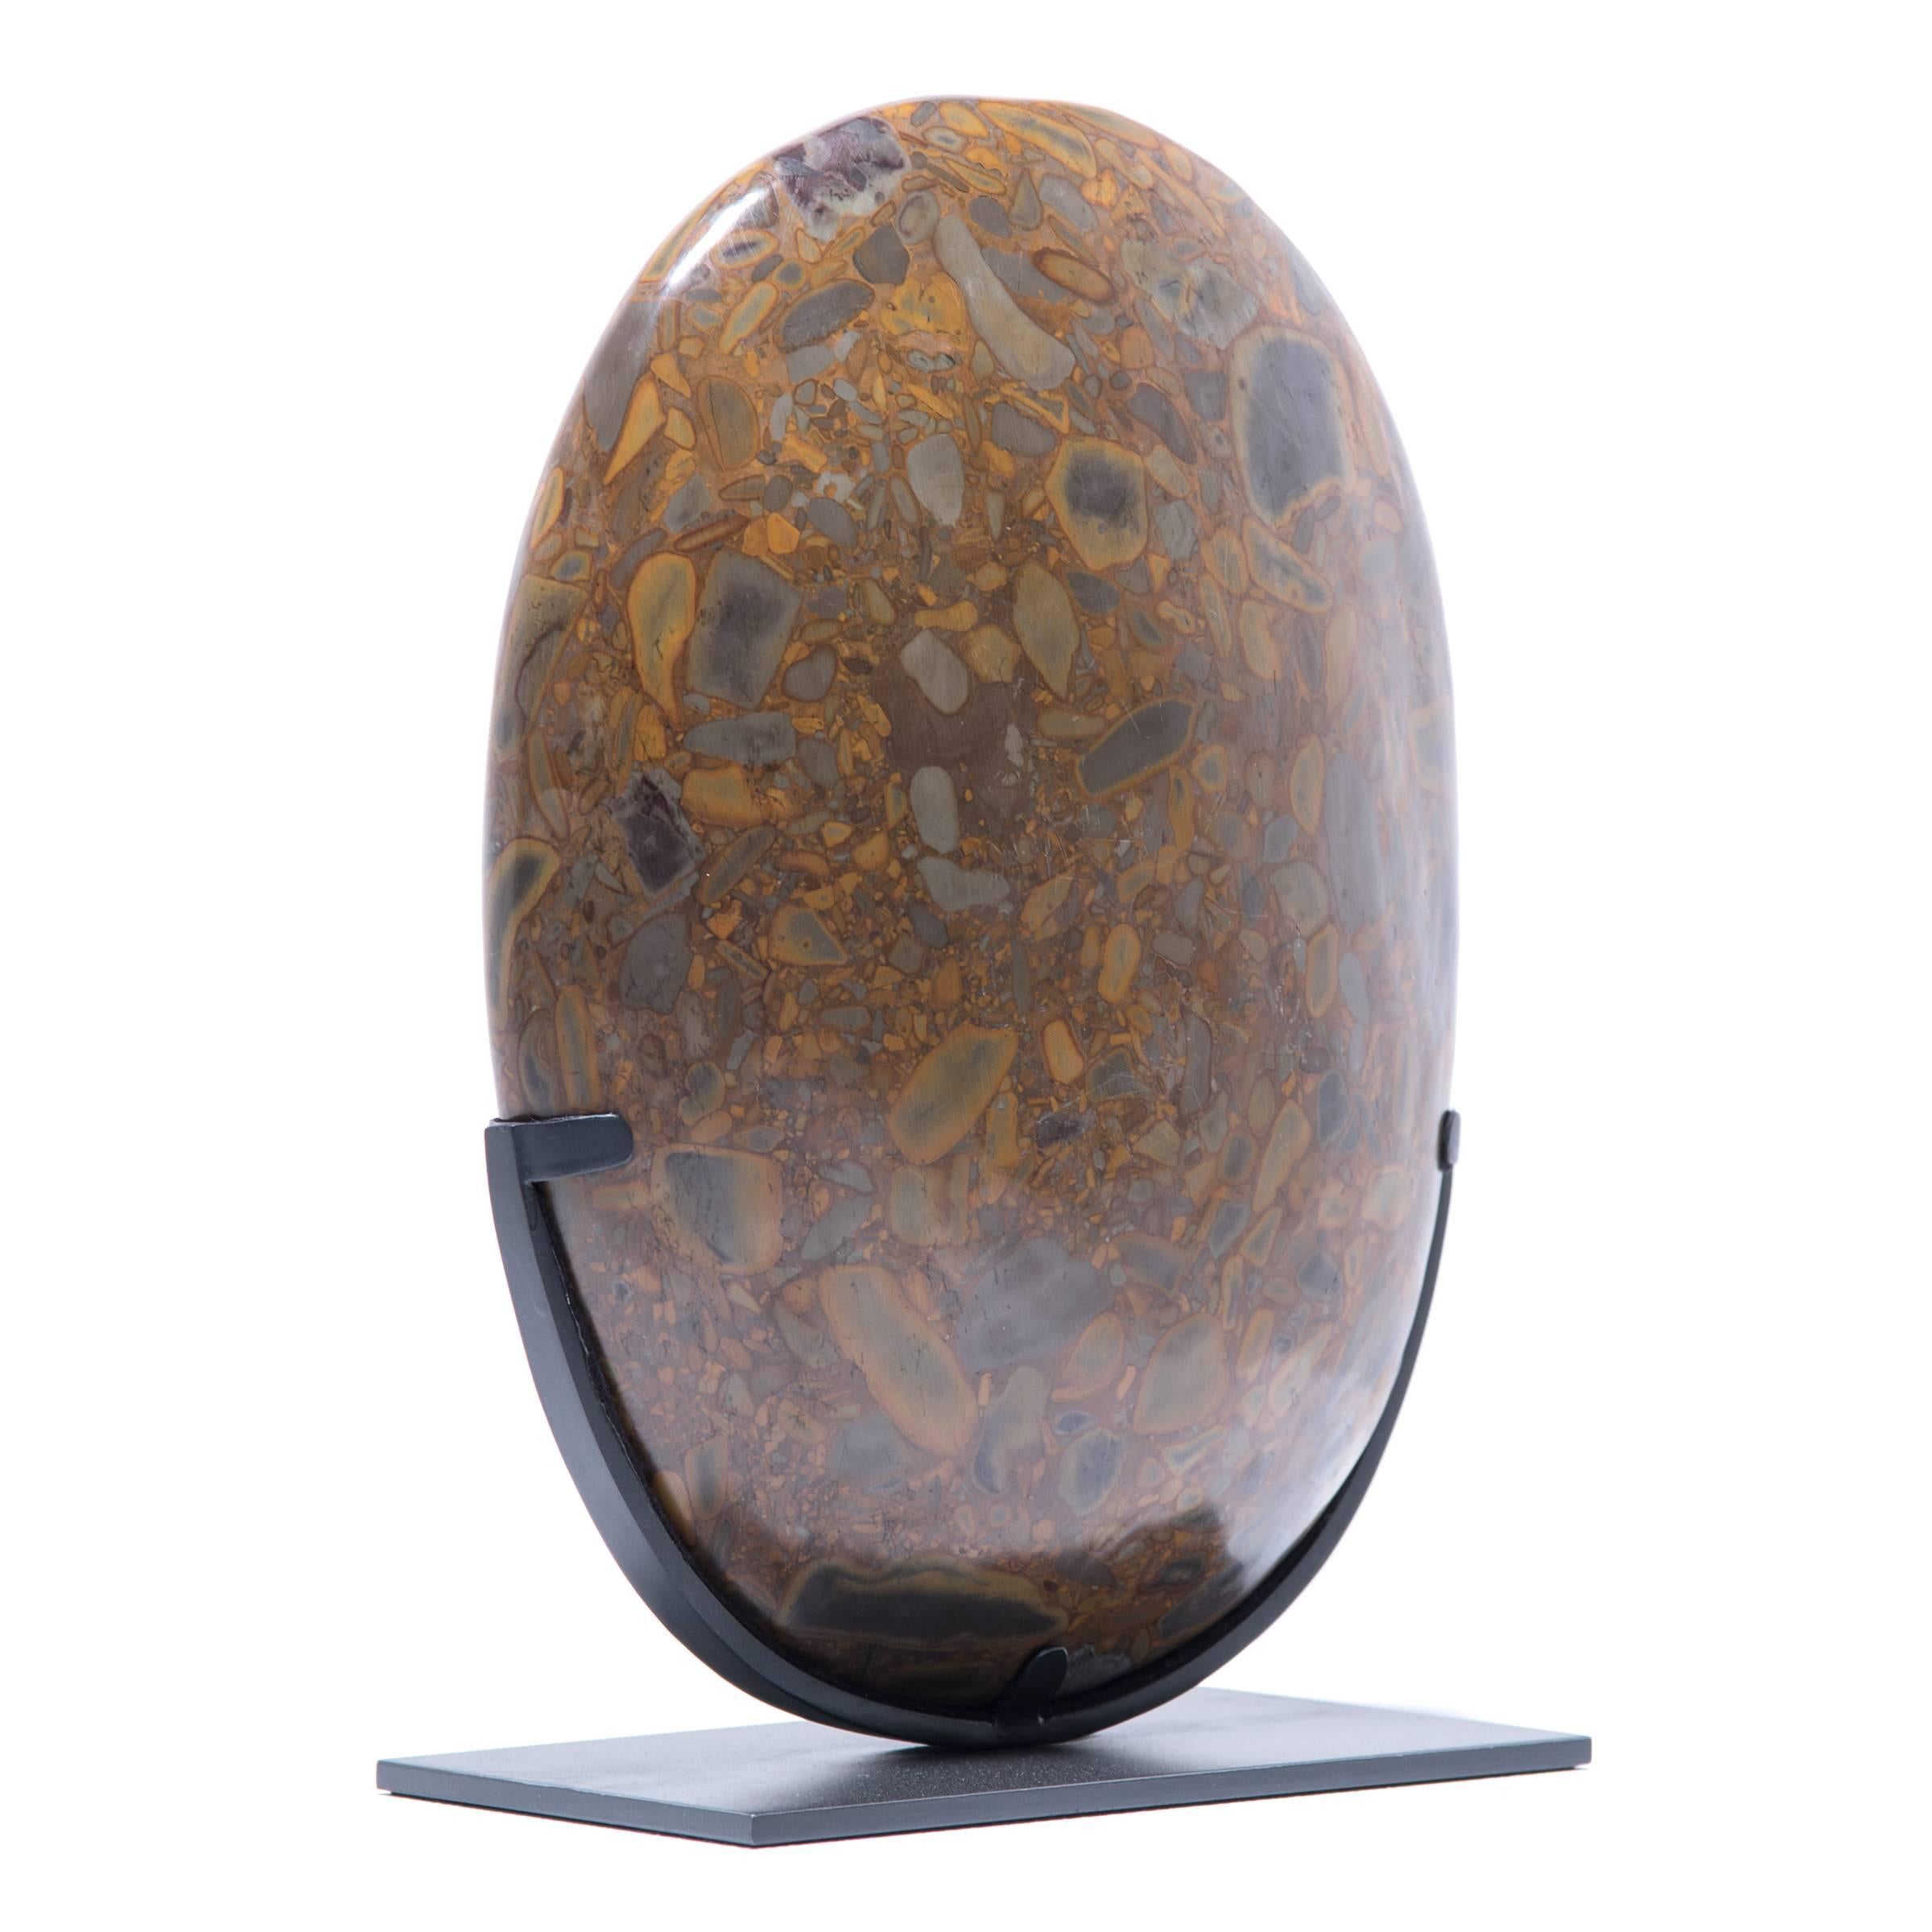 Puddingstone is named for its unique composite nature, suspending numerous multicolored pebbles that resemble raisins in a pudding. Historically, it has been favored by artists and calligraphers as an ideal surface on which to place scrolls for